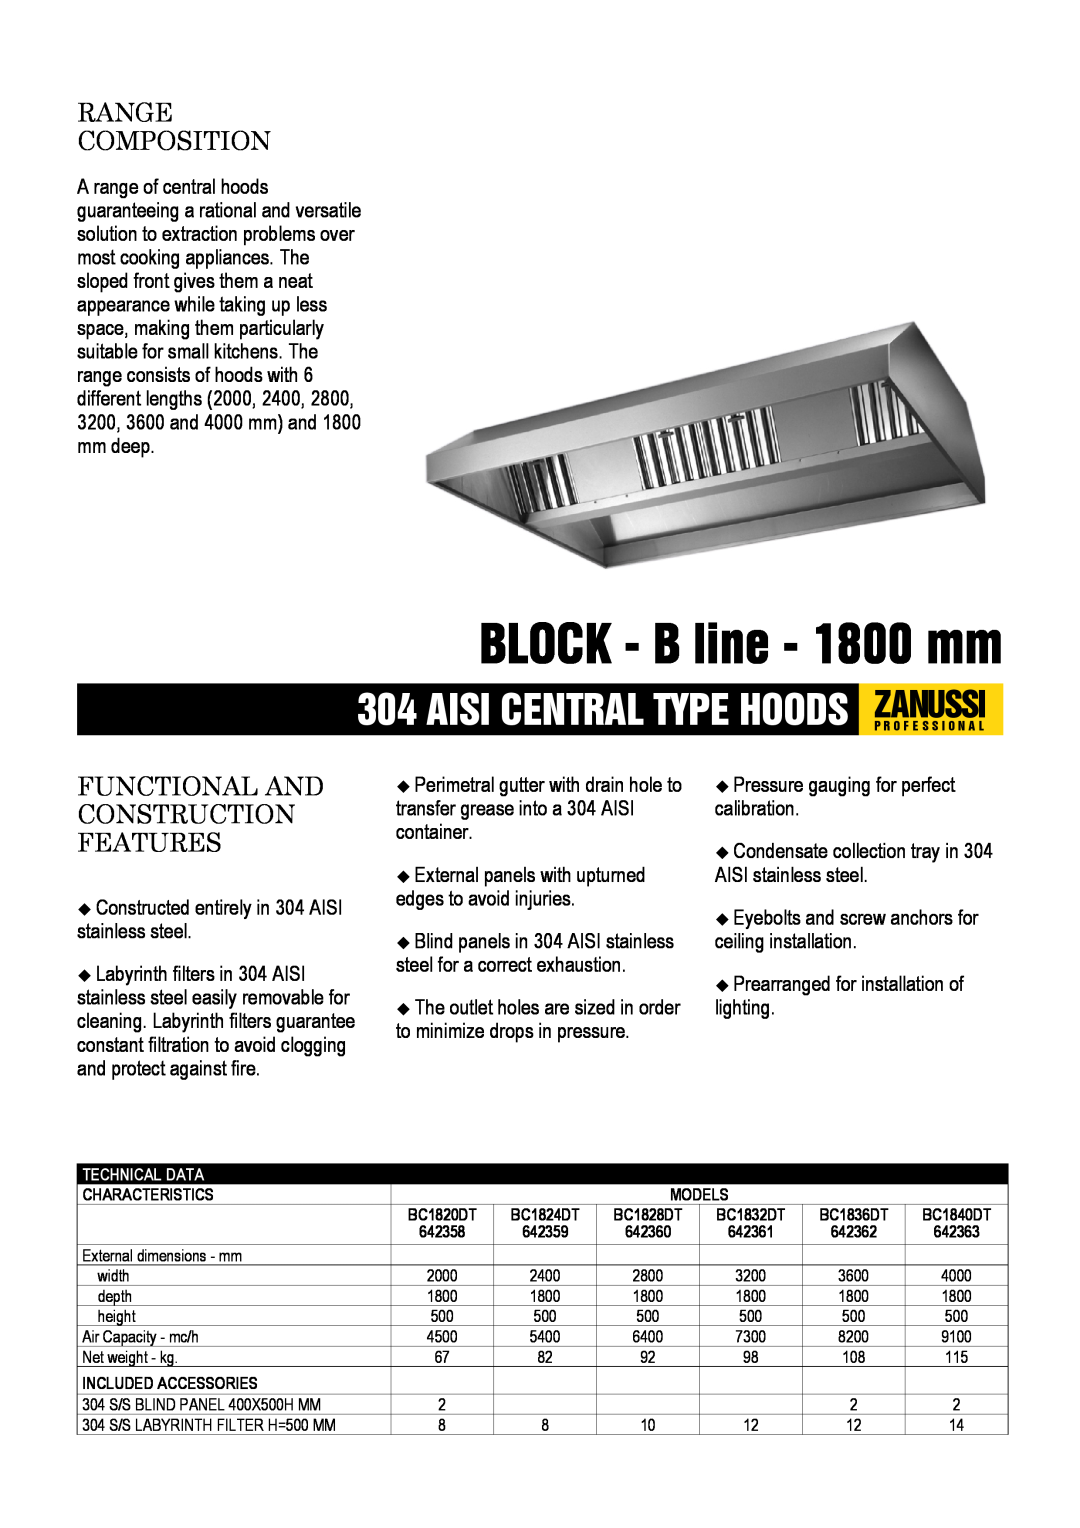 Zanussi BC1836DT, BC1840DT dimensions BLOCK - B line - 1800 mm, Range Composition, Functional And Construction Features 